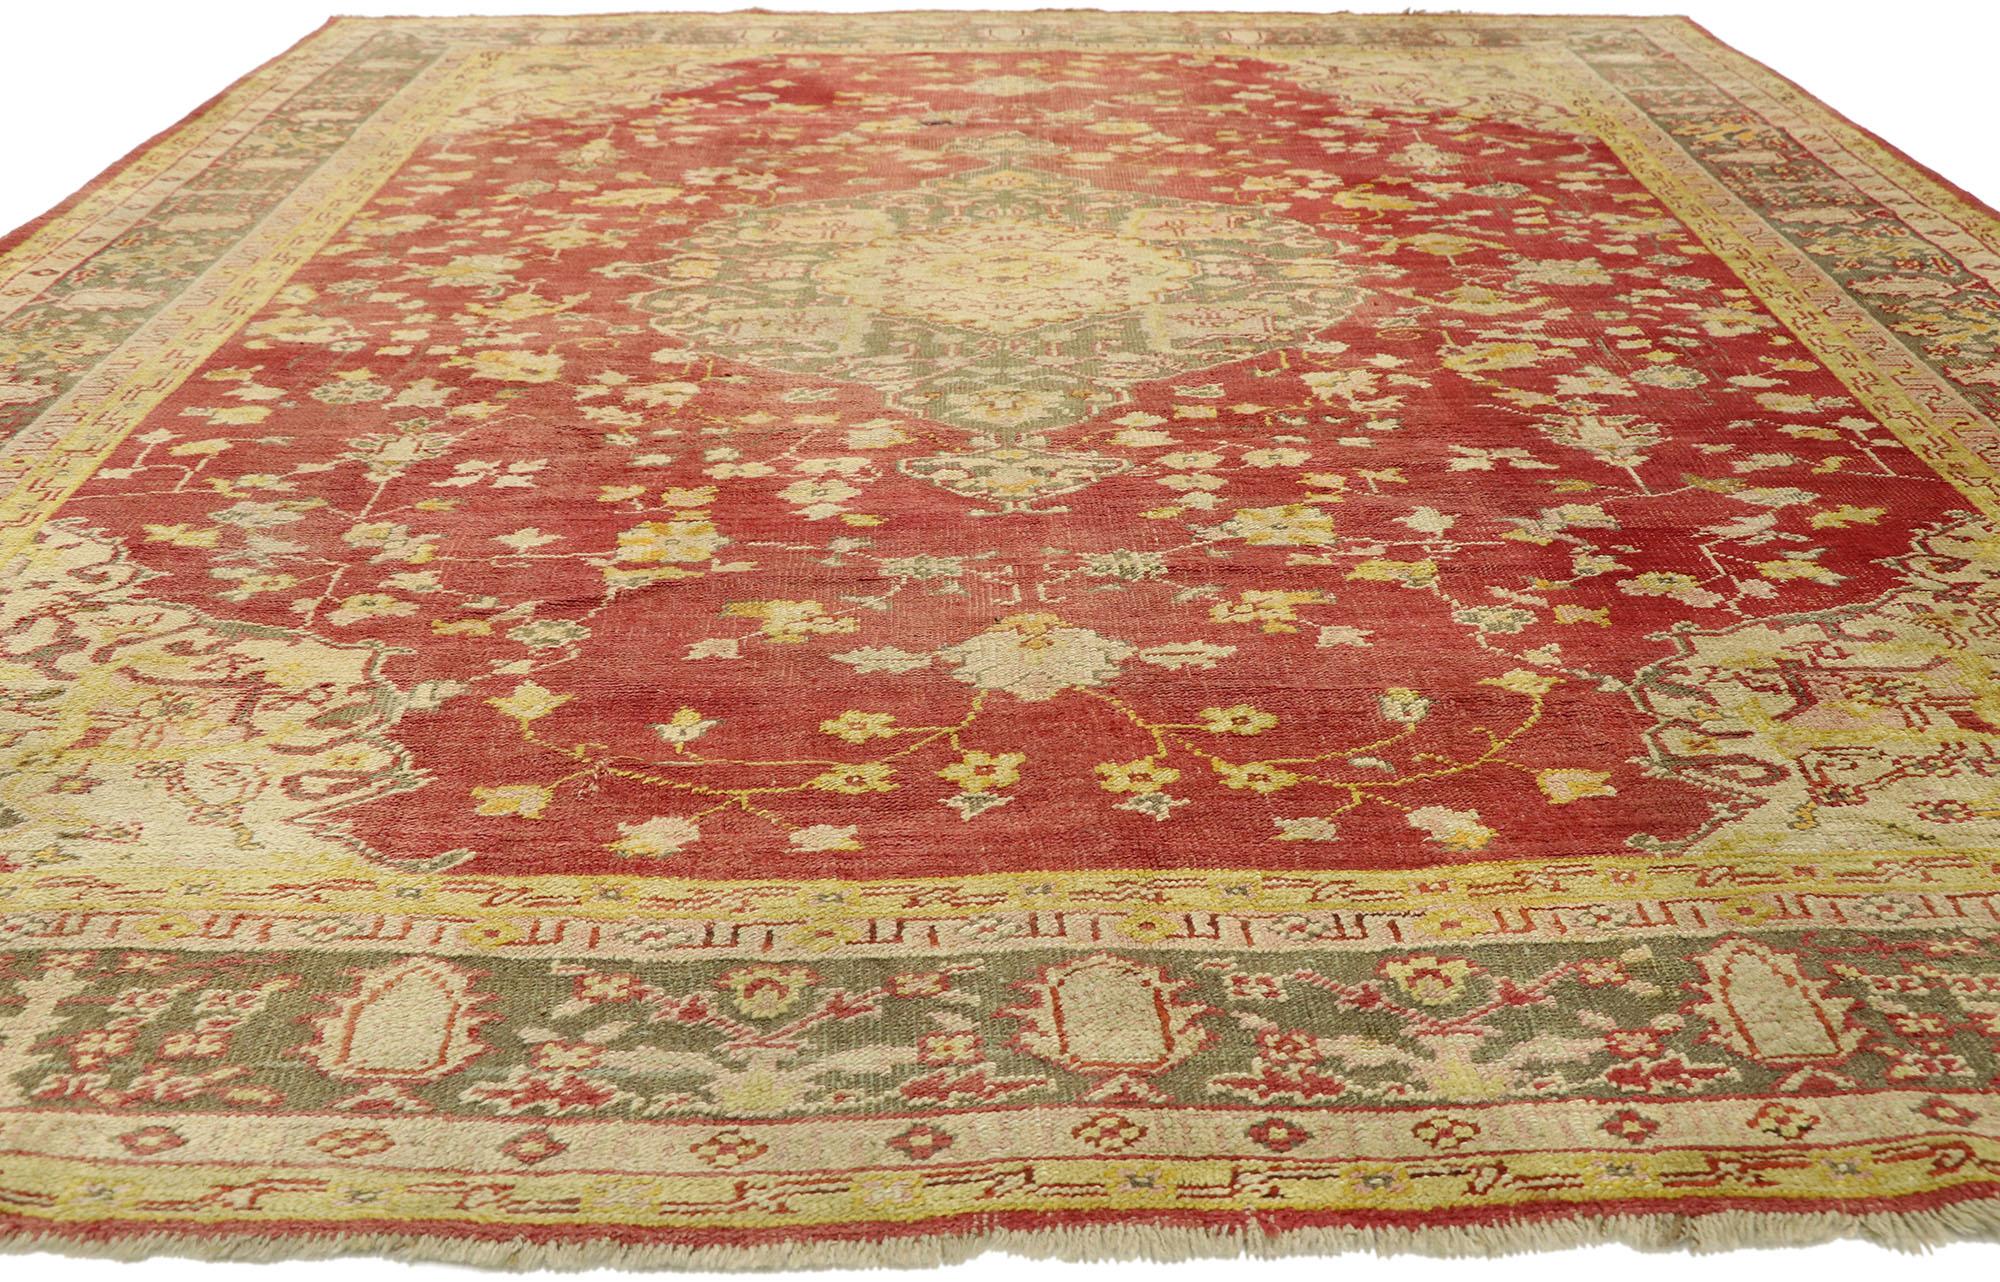 Distressed Antique Turkish Oushak Rug, 9'07 x 12'01 For Sale 3